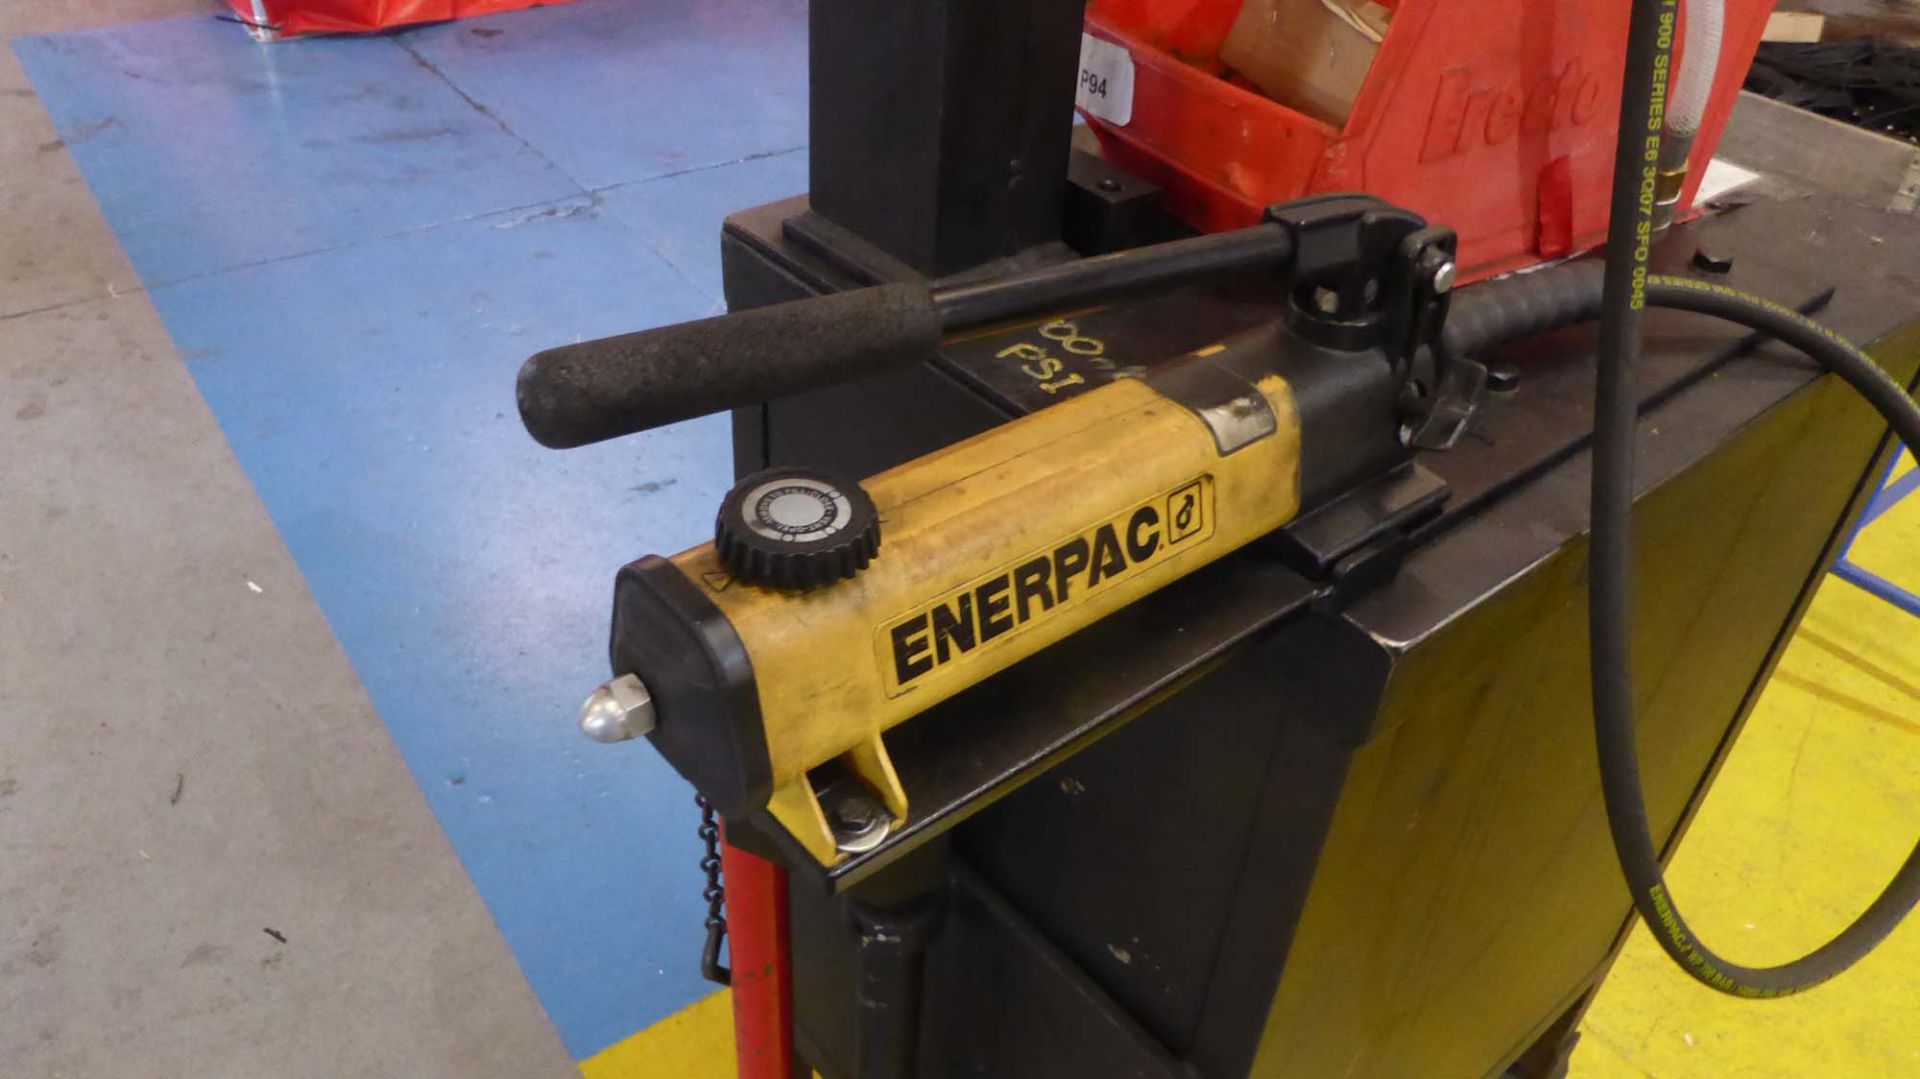 Load test rig comprising Enerpac 800psi manual hydraulic ram set and gauge with mobile cabinet and - Image 4 of 4